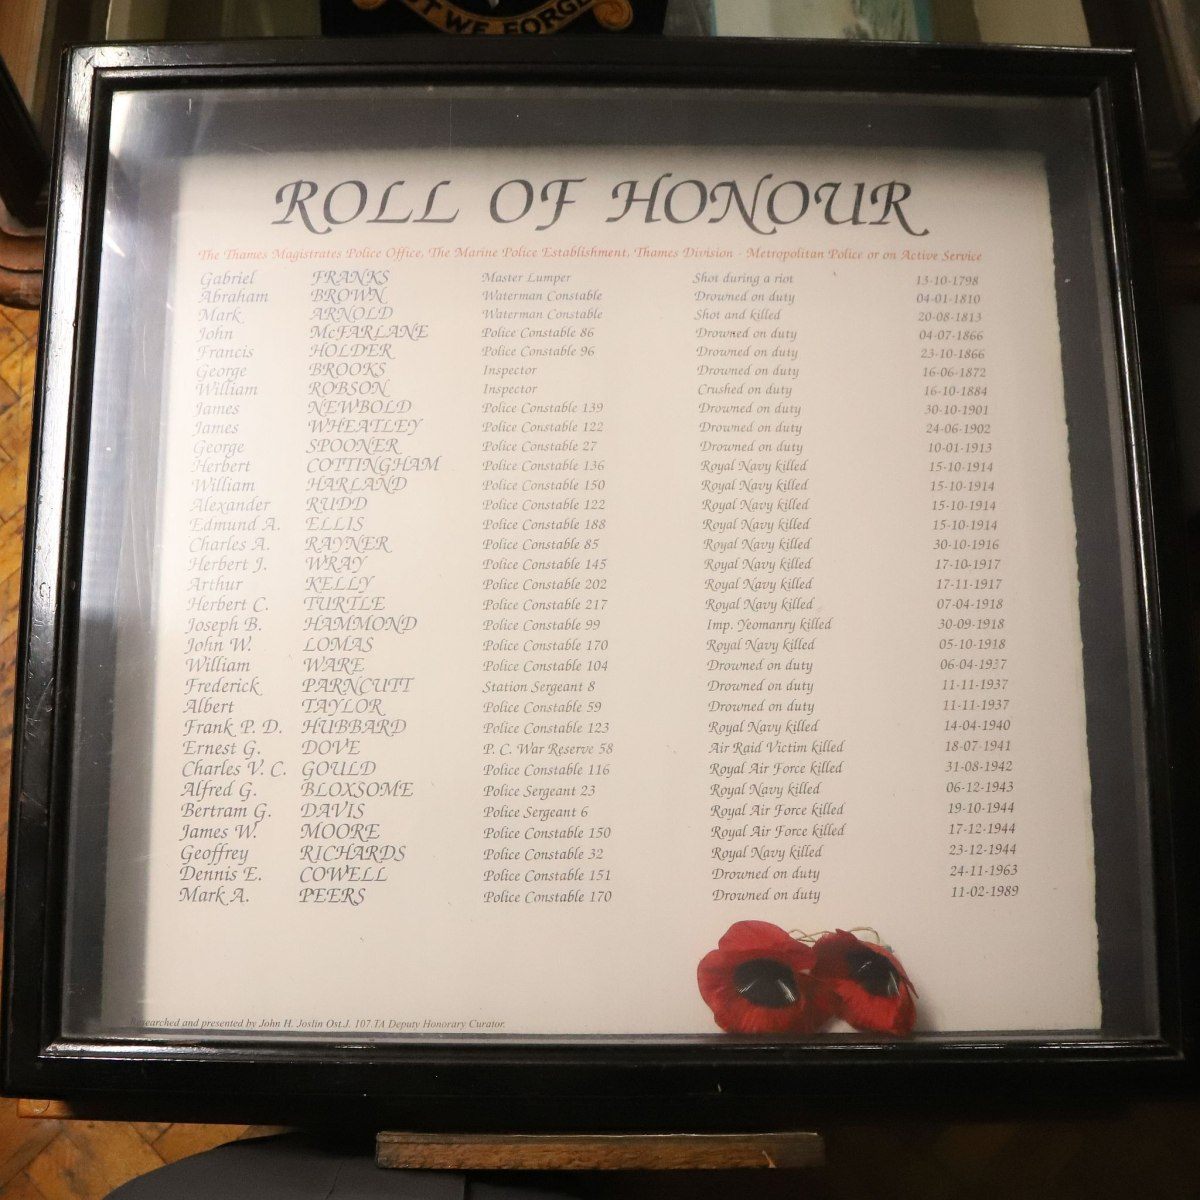 Roll of Honour of River Thames Police Officers killed on duty or on active service. Metropolitan Police Marine Policing Unit Museum, River Thames, London.